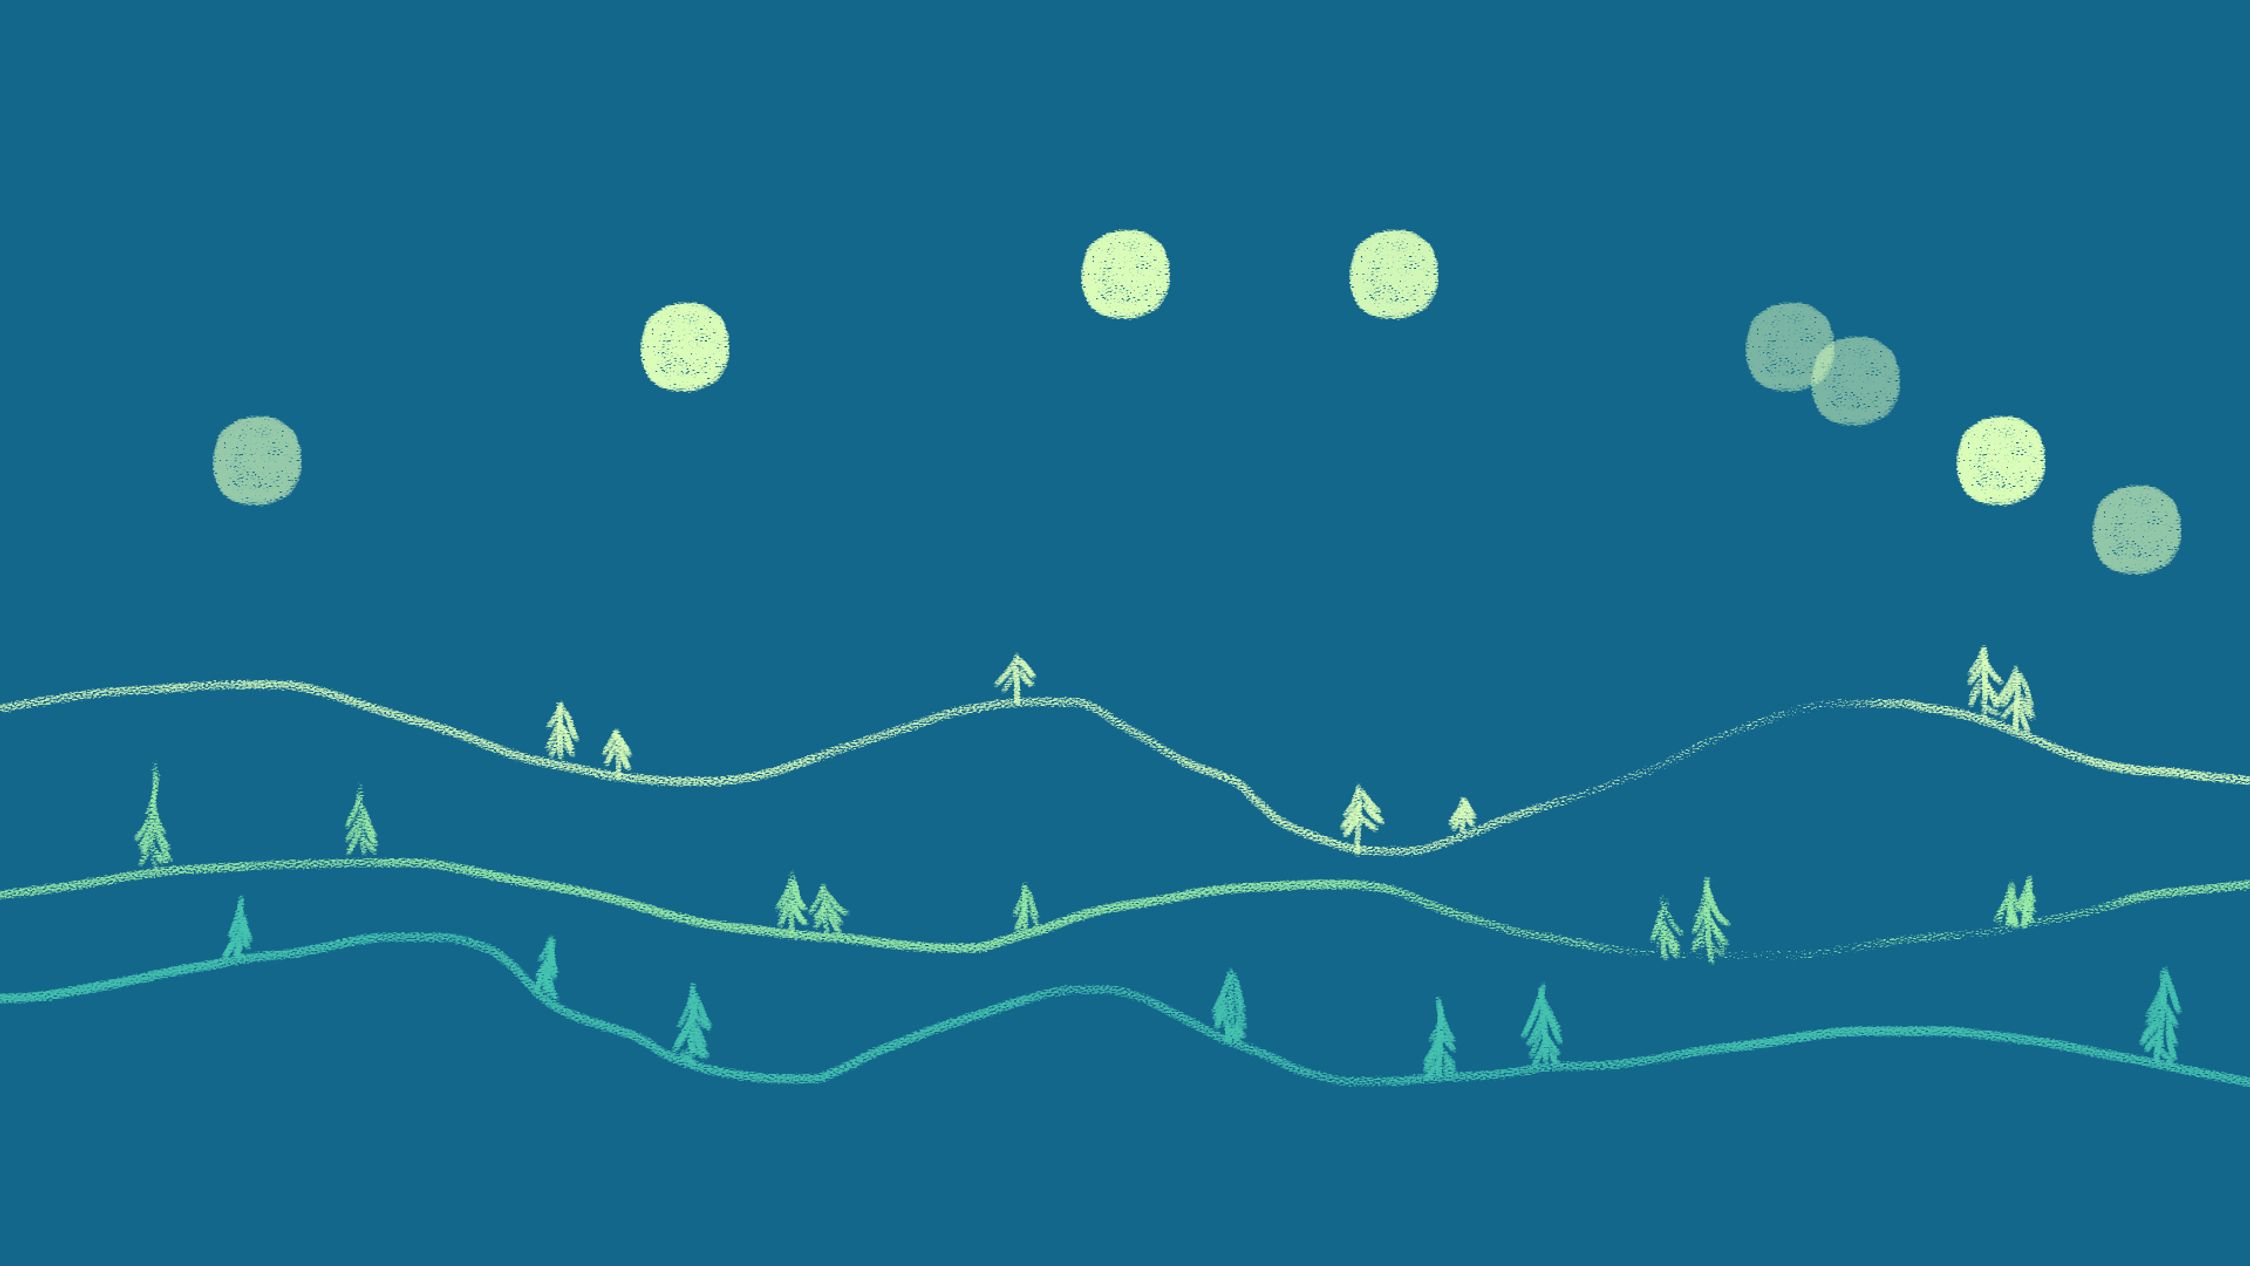 A minimalist artistic illustration depicting a series of wavy, horizontal lines against a dark blue background, representing hills. Scattered across the hills are simple, triangular shapes that suggest trees. Above this tranquil scene, there are multiple round shapes with a textured appearance, representing moons or celestial bodies. The use of light greenish-yellow for these elements creates a striking contrast with the dark background, giving the impression of a night scene. The composition is serene, with a whimsical or dreamlike quality.